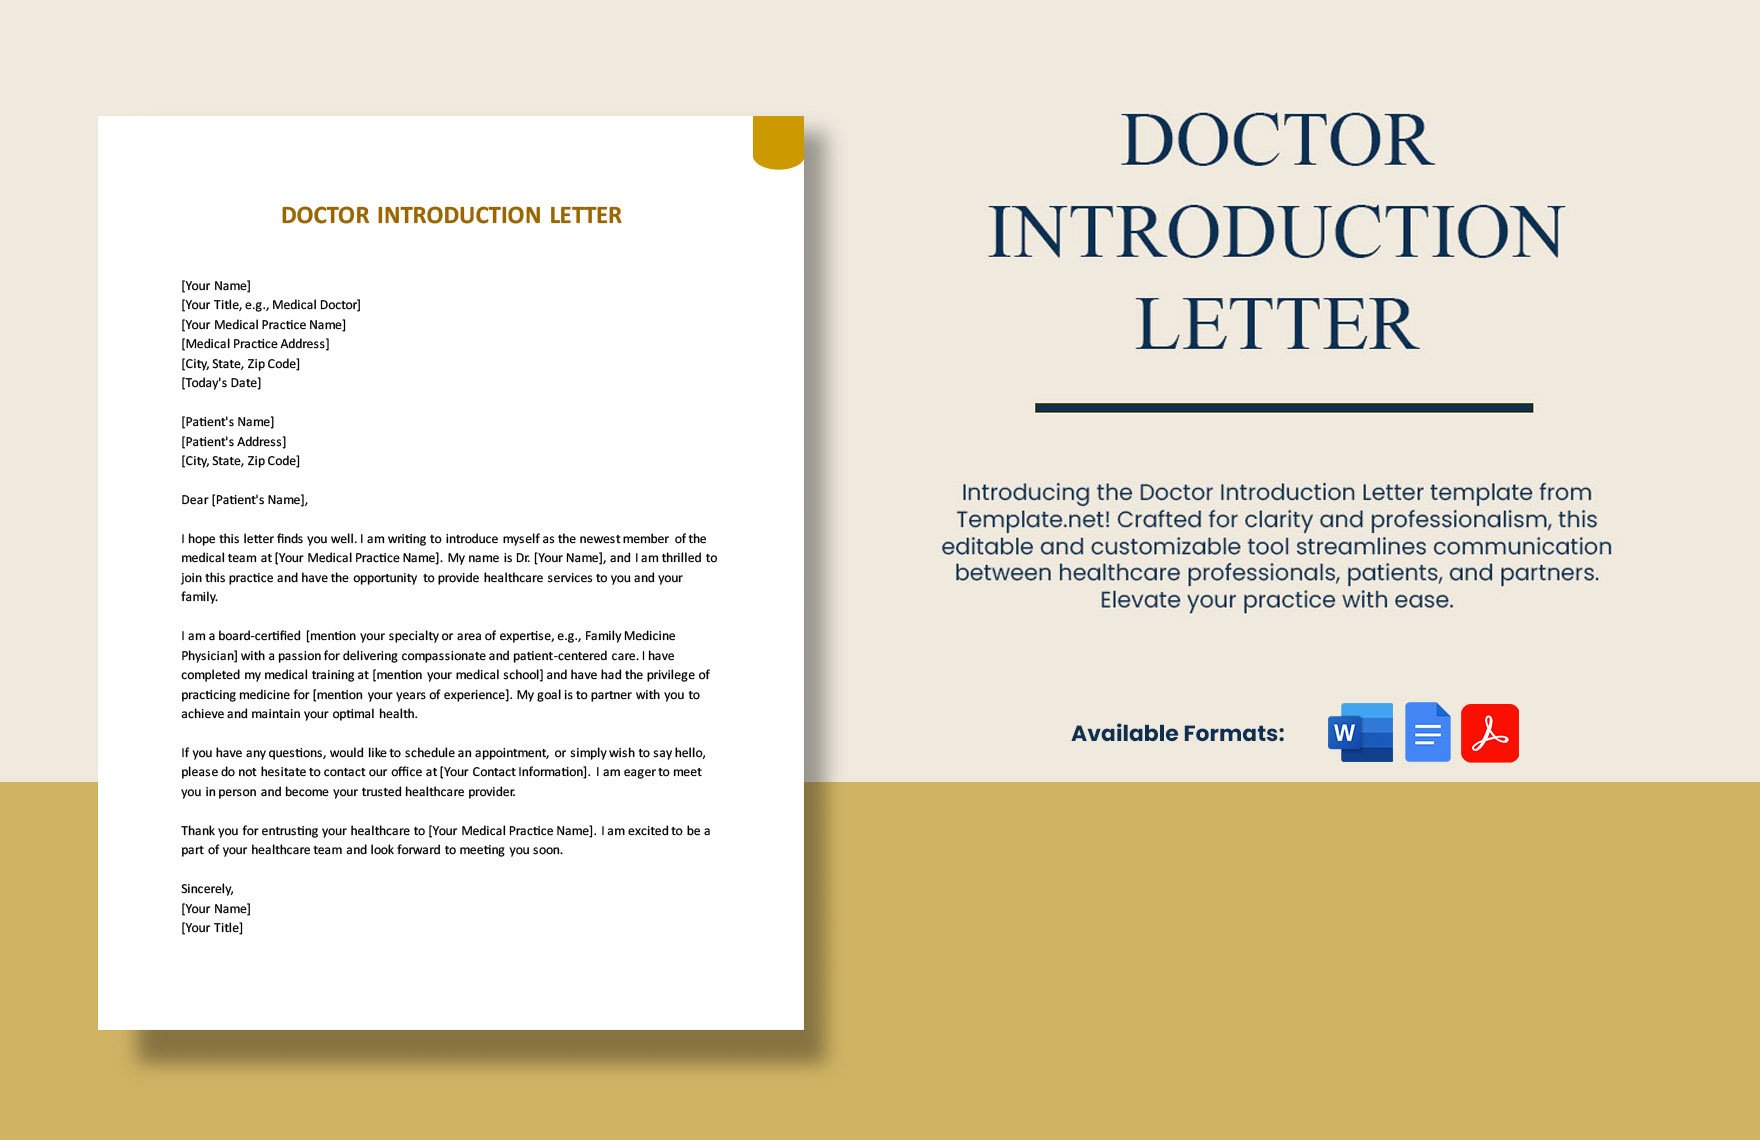 Doctor Introduction Letter